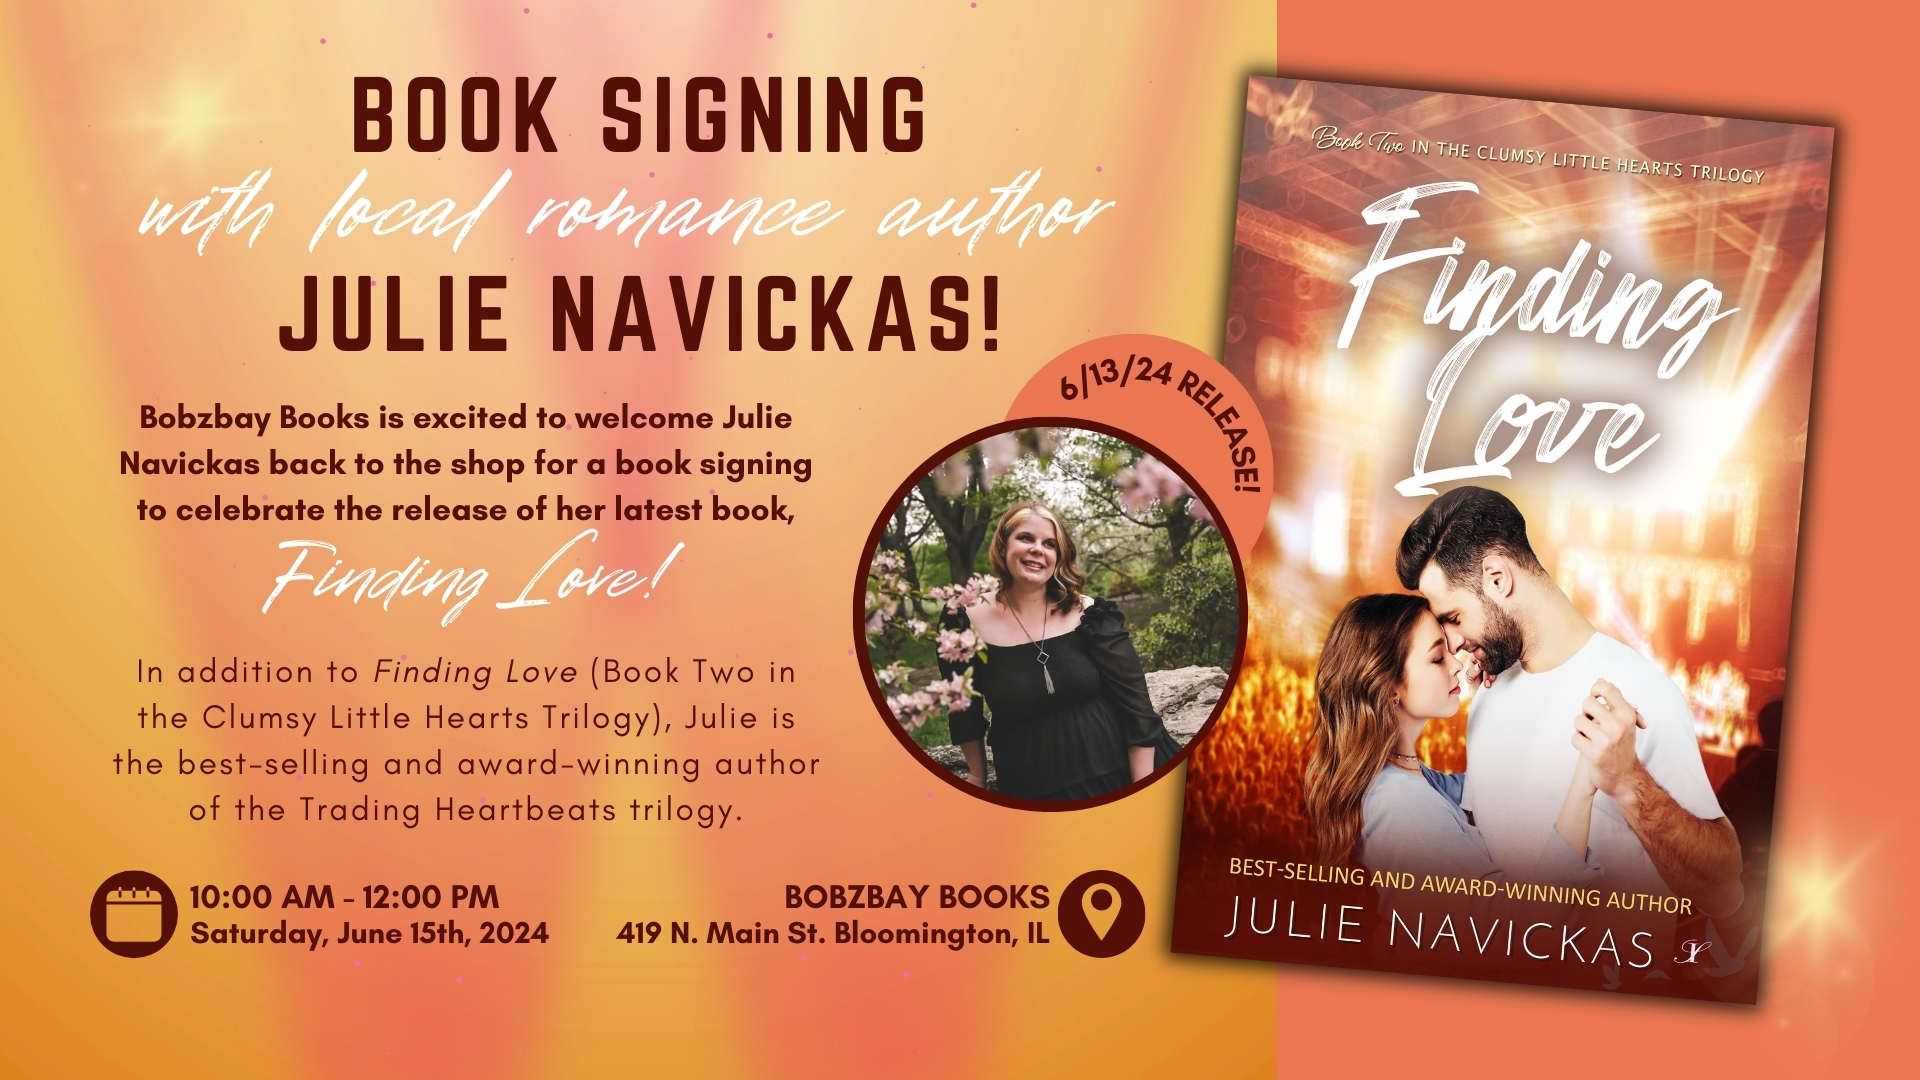 Book Signing with Local Romance Author Julie Navickas at Bobzbay Books